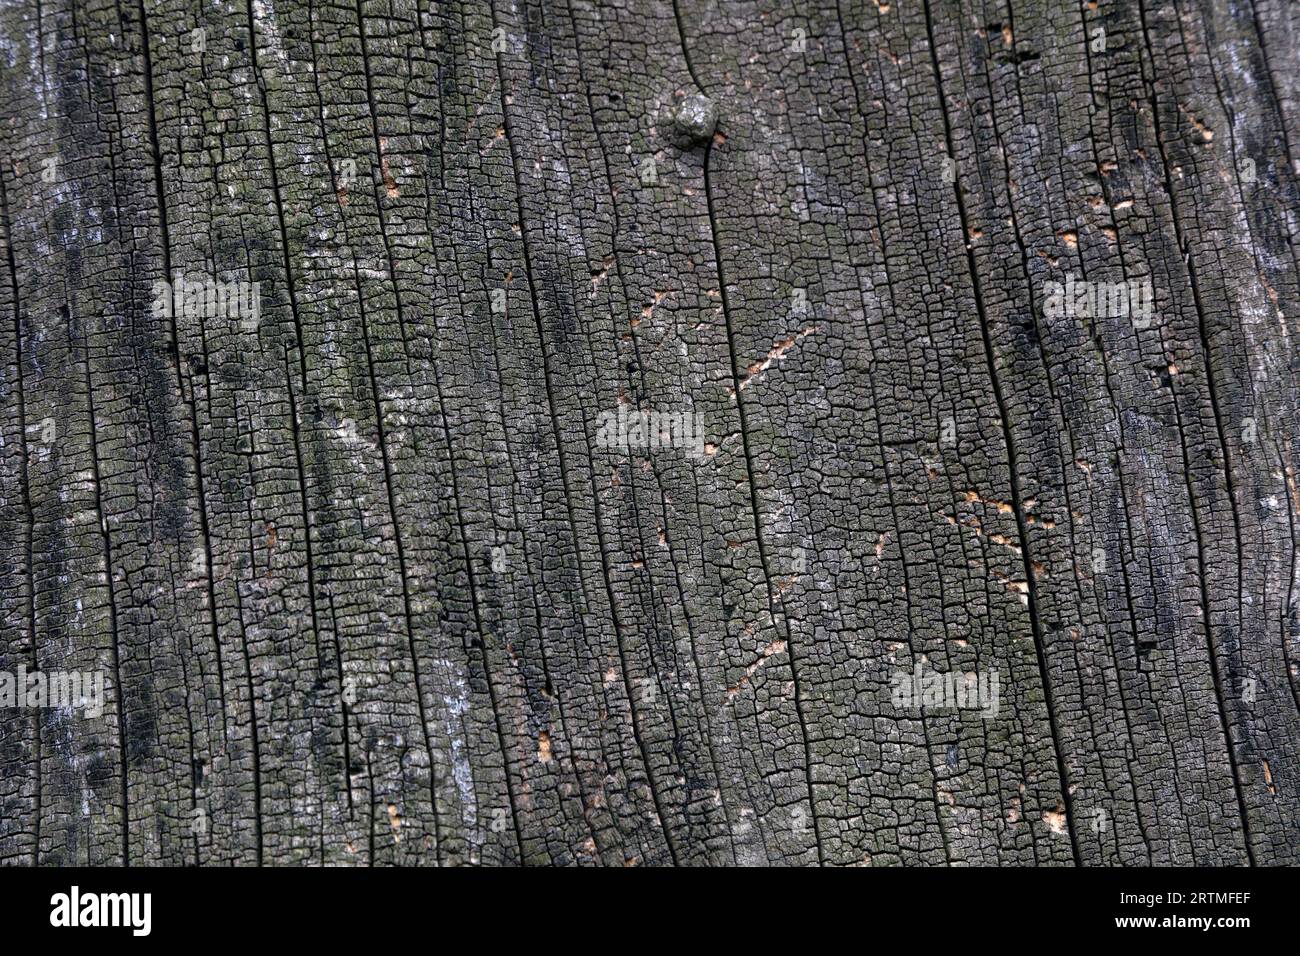 The bark texture of the old Sophora tree Stock Photo